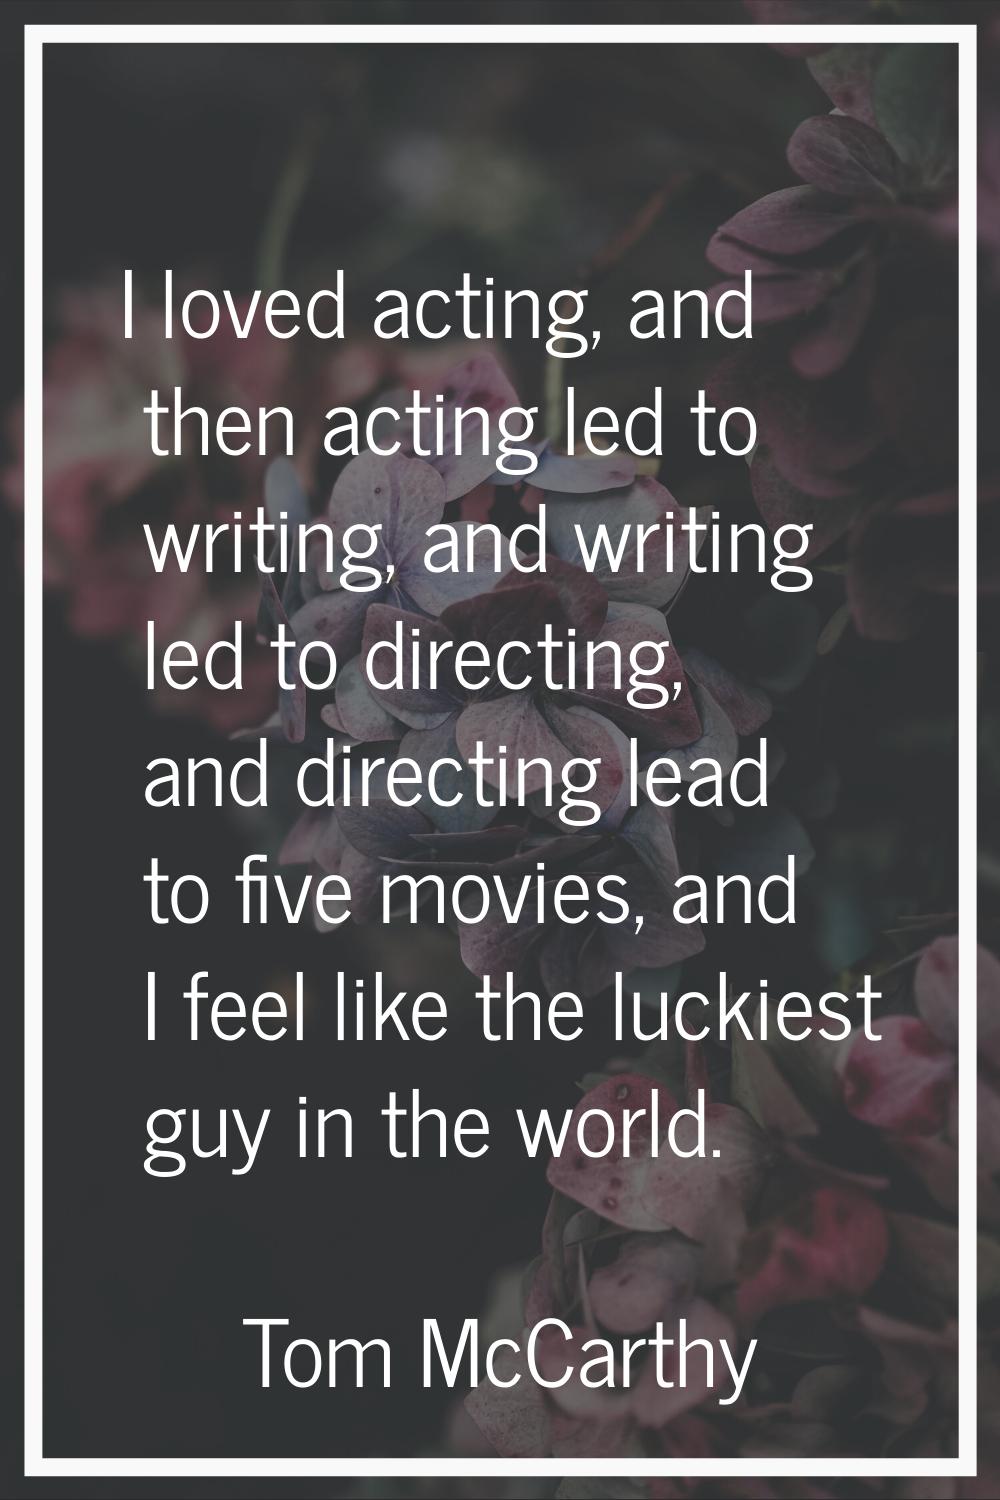 I loved acting, and then acting led to writing, and writing led to directing, and directing lead to